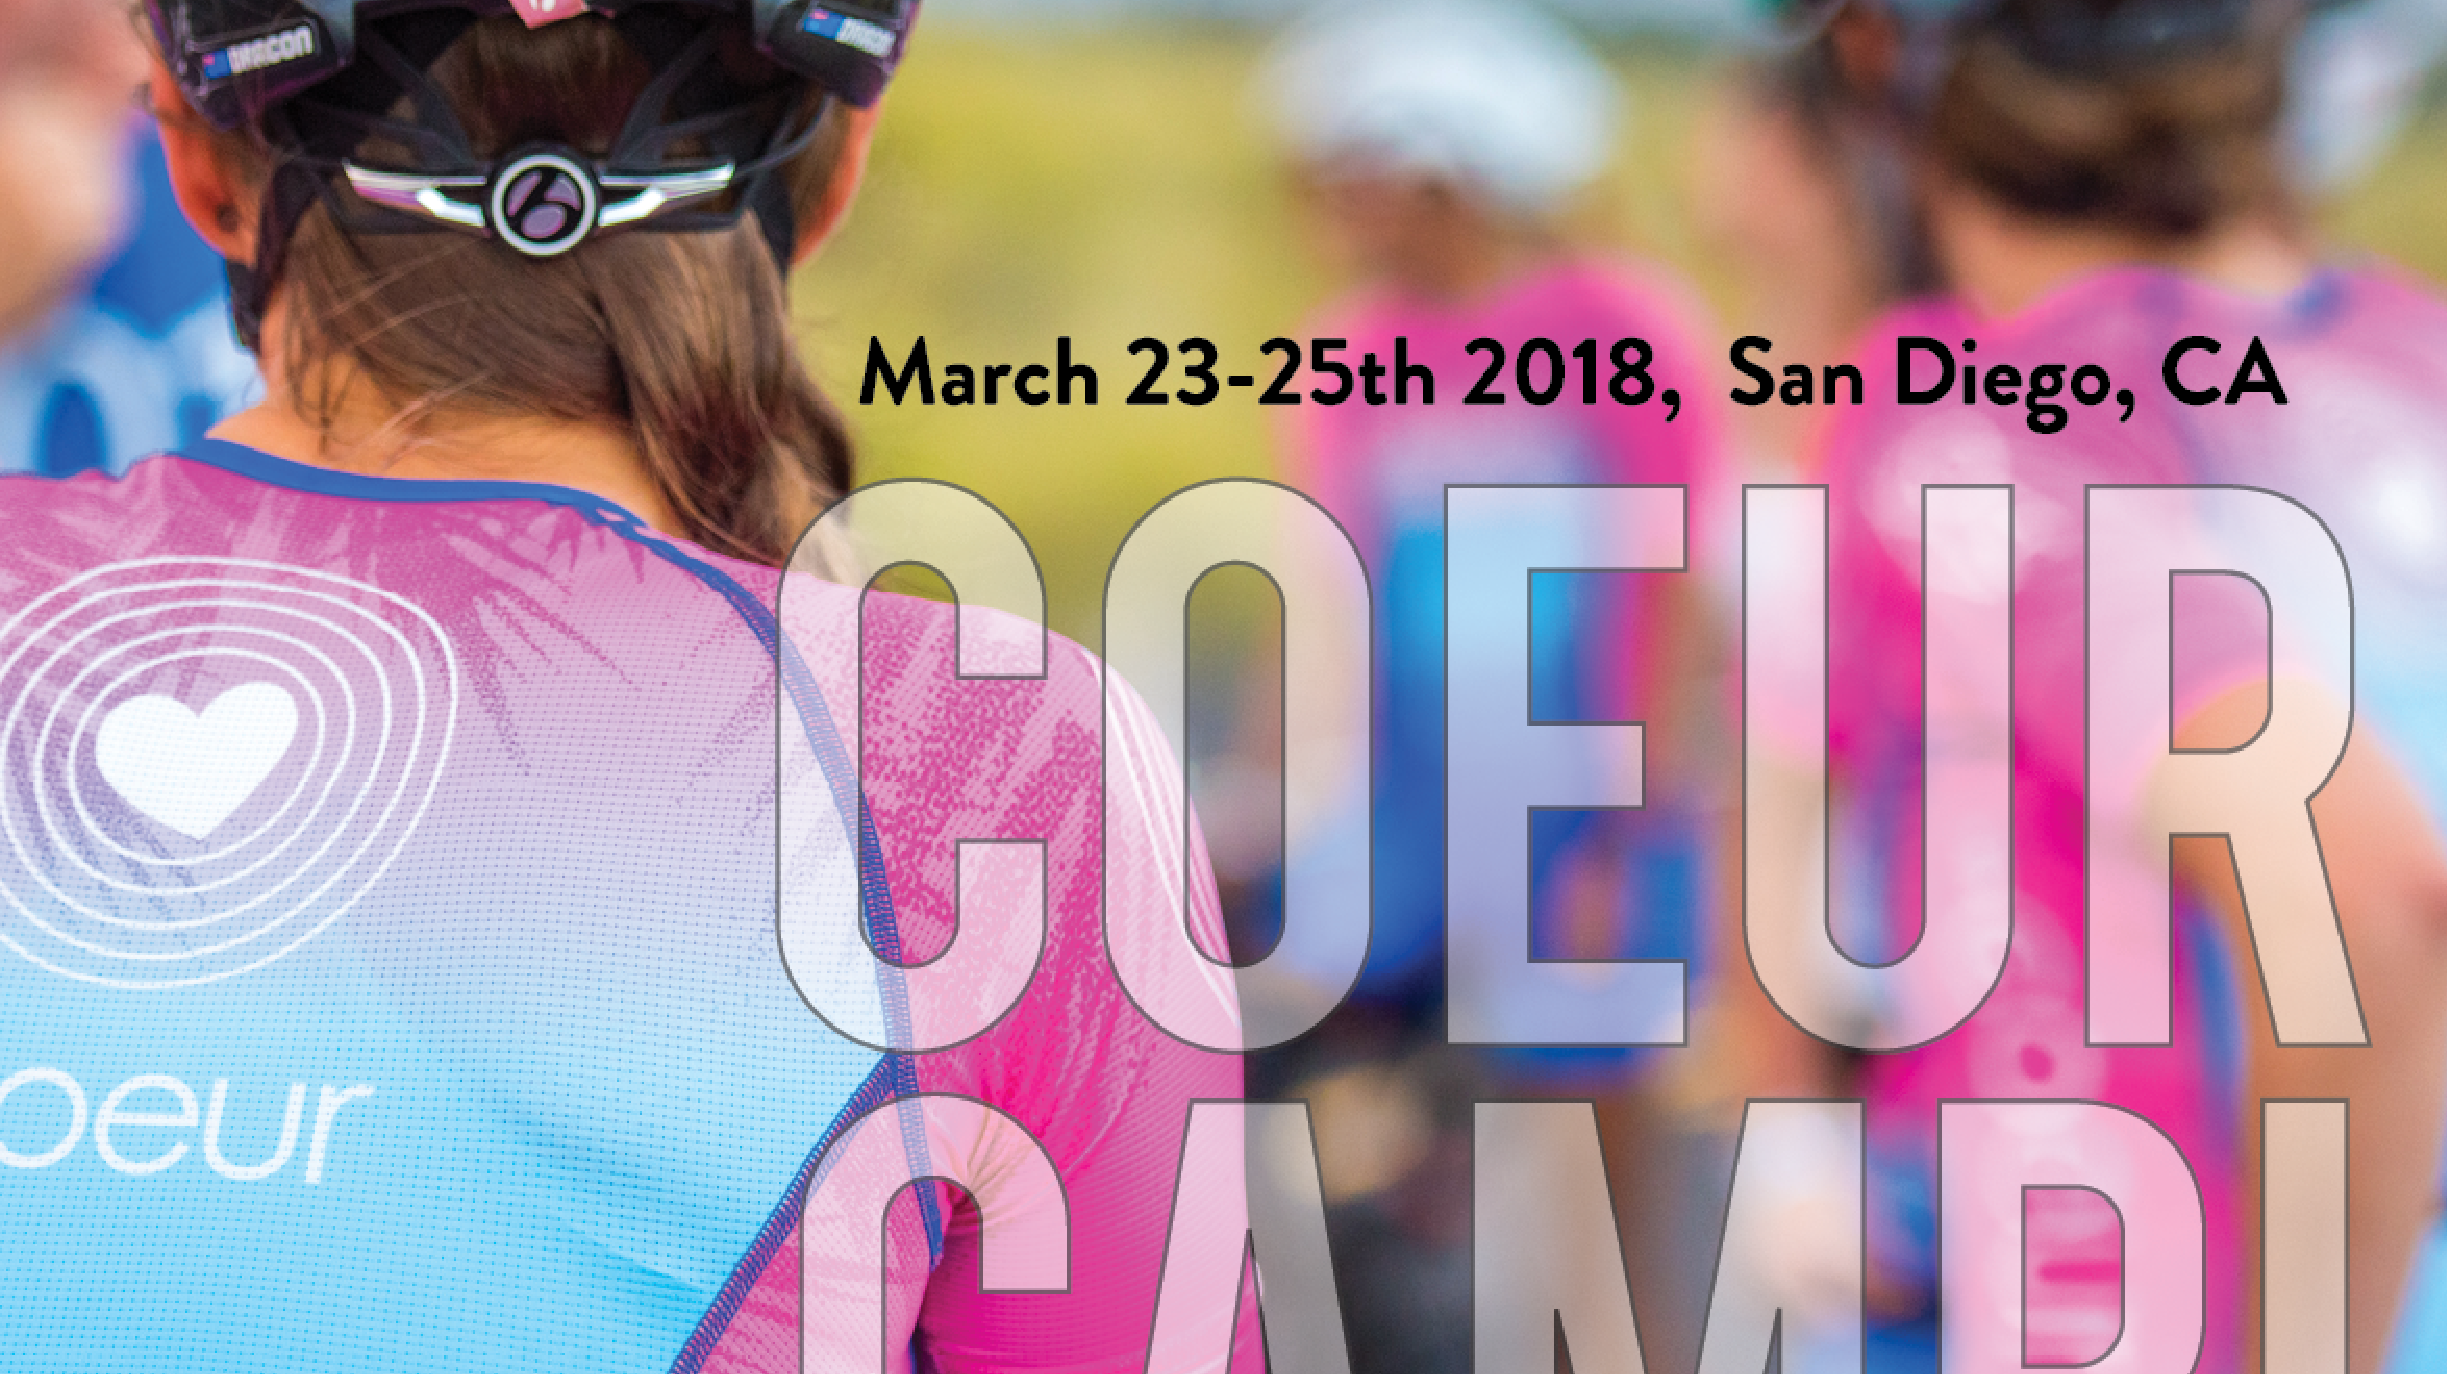 Women's Cycling and Triathlon Camp